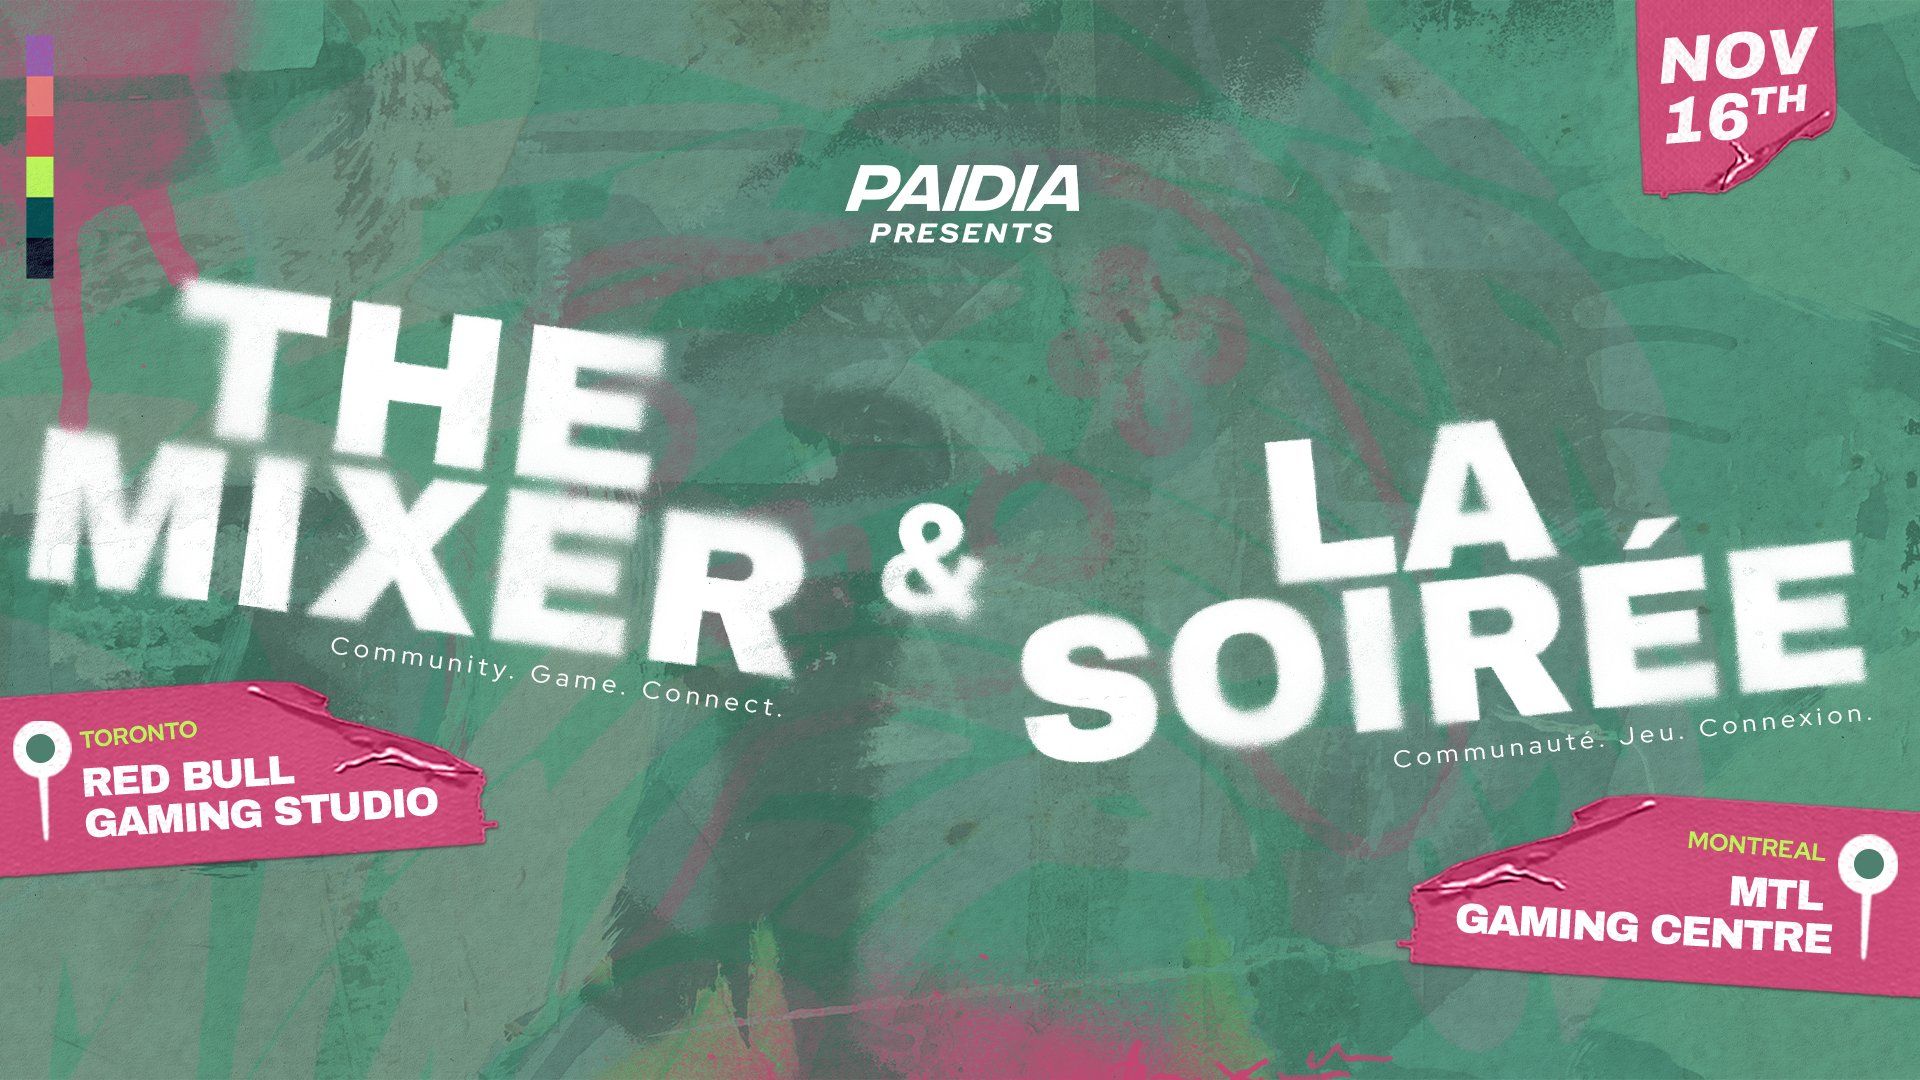 Celebrating Women in Gaming and Promoting Tolerance: Paidia's The Mixer Event